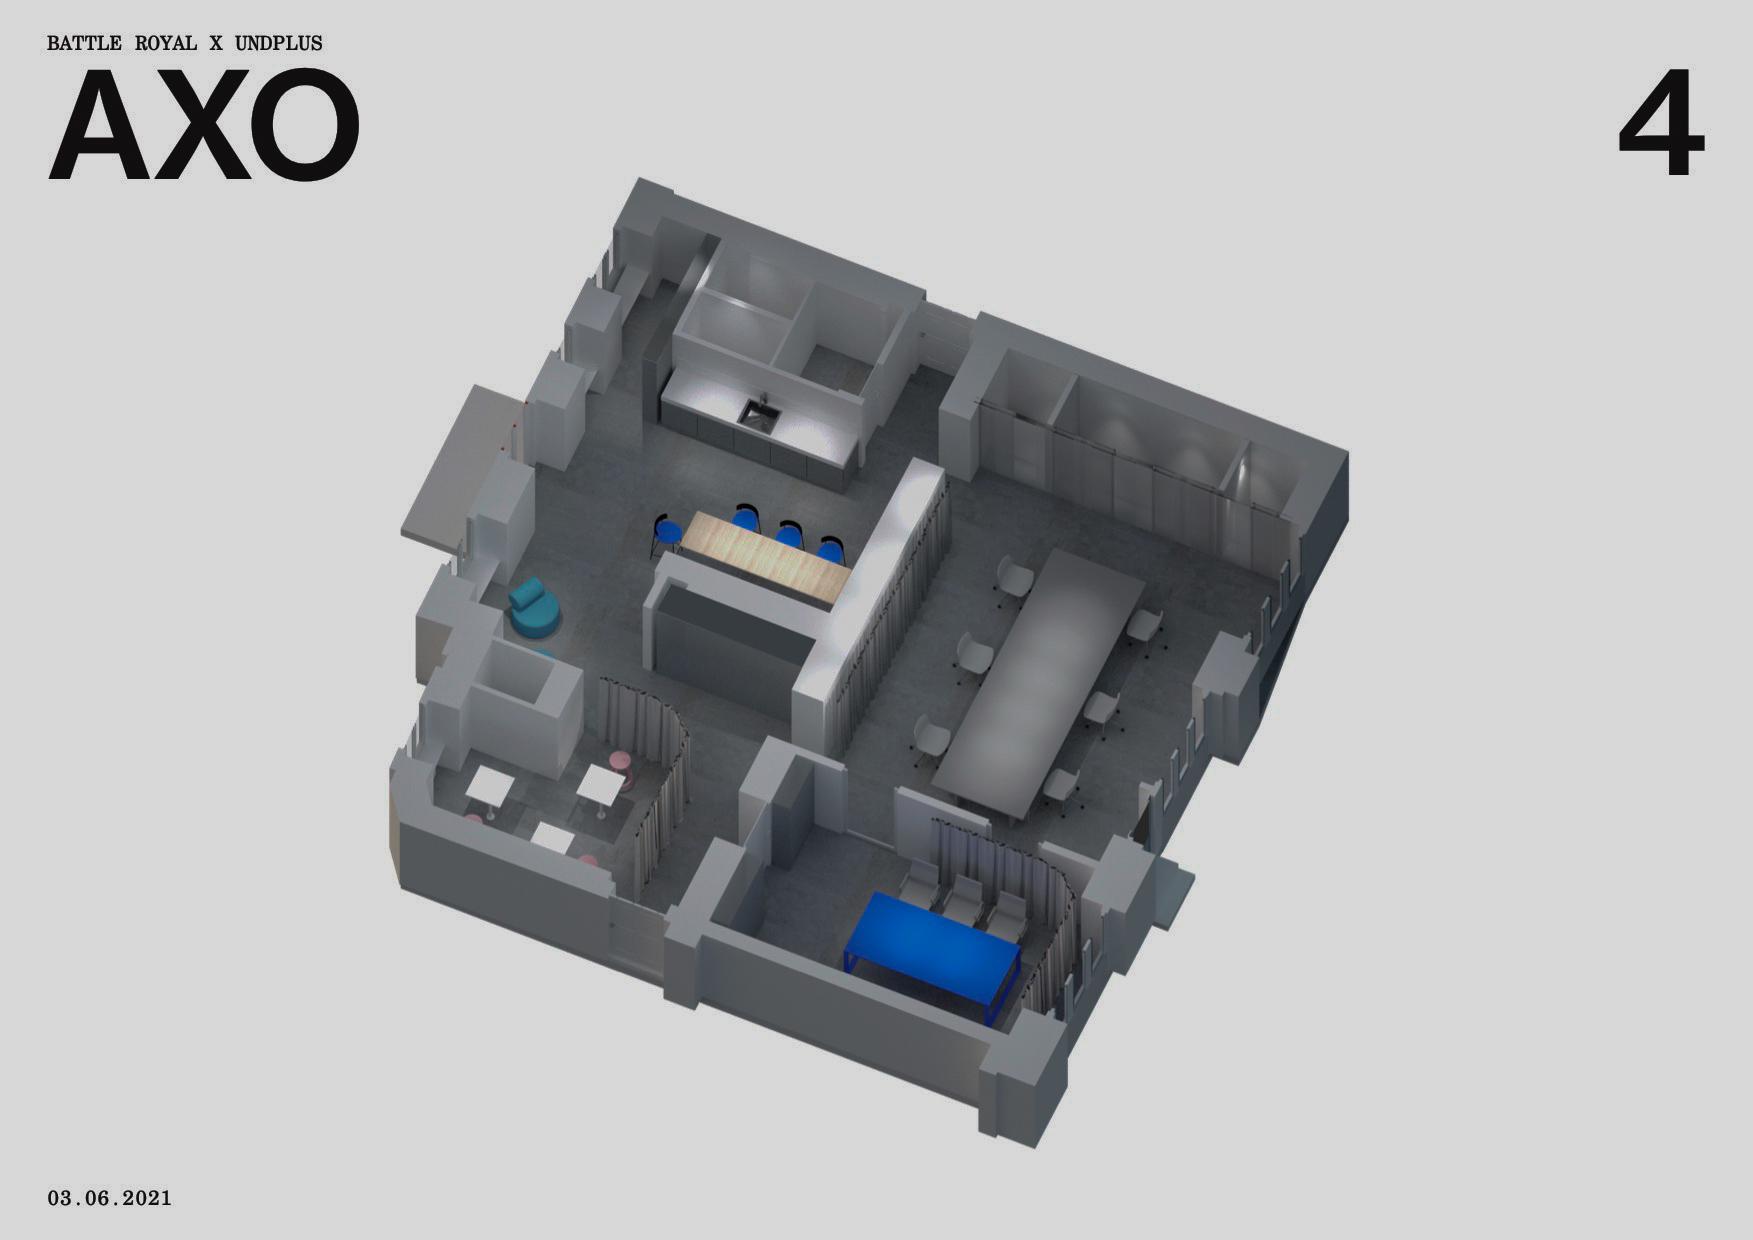 A 3D model of Battle Royal Studios' Berlin office. Gray with blue accents. The number 4 is in the right corner and "Battle Royal x Undplus AXO" is in the left corner, the date "03.06.2021" in the bottom left corner.